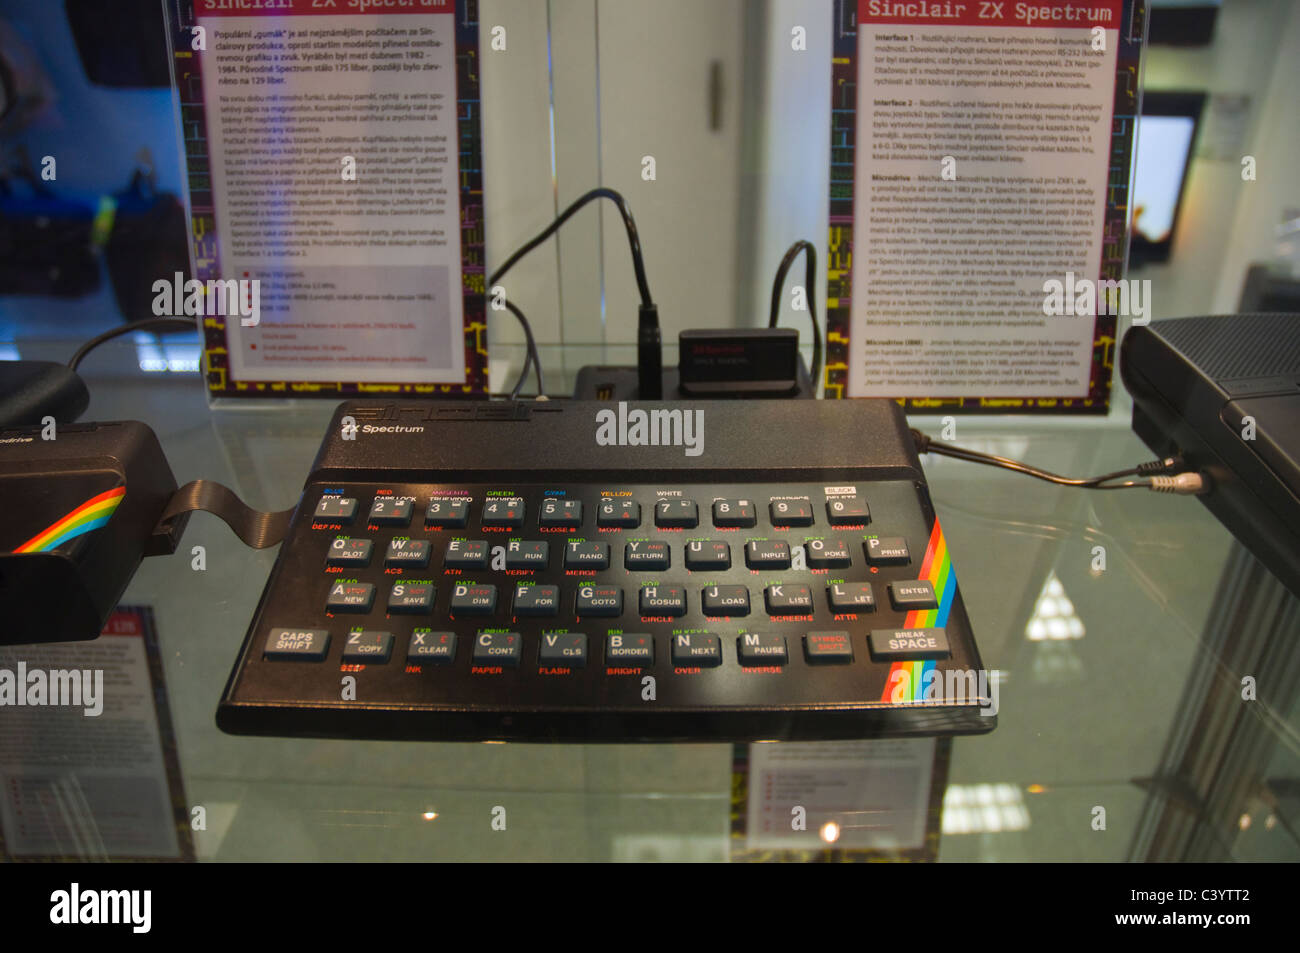 Sinclair ZX Spectrum personal computer fromthe 1980s Stock Photo